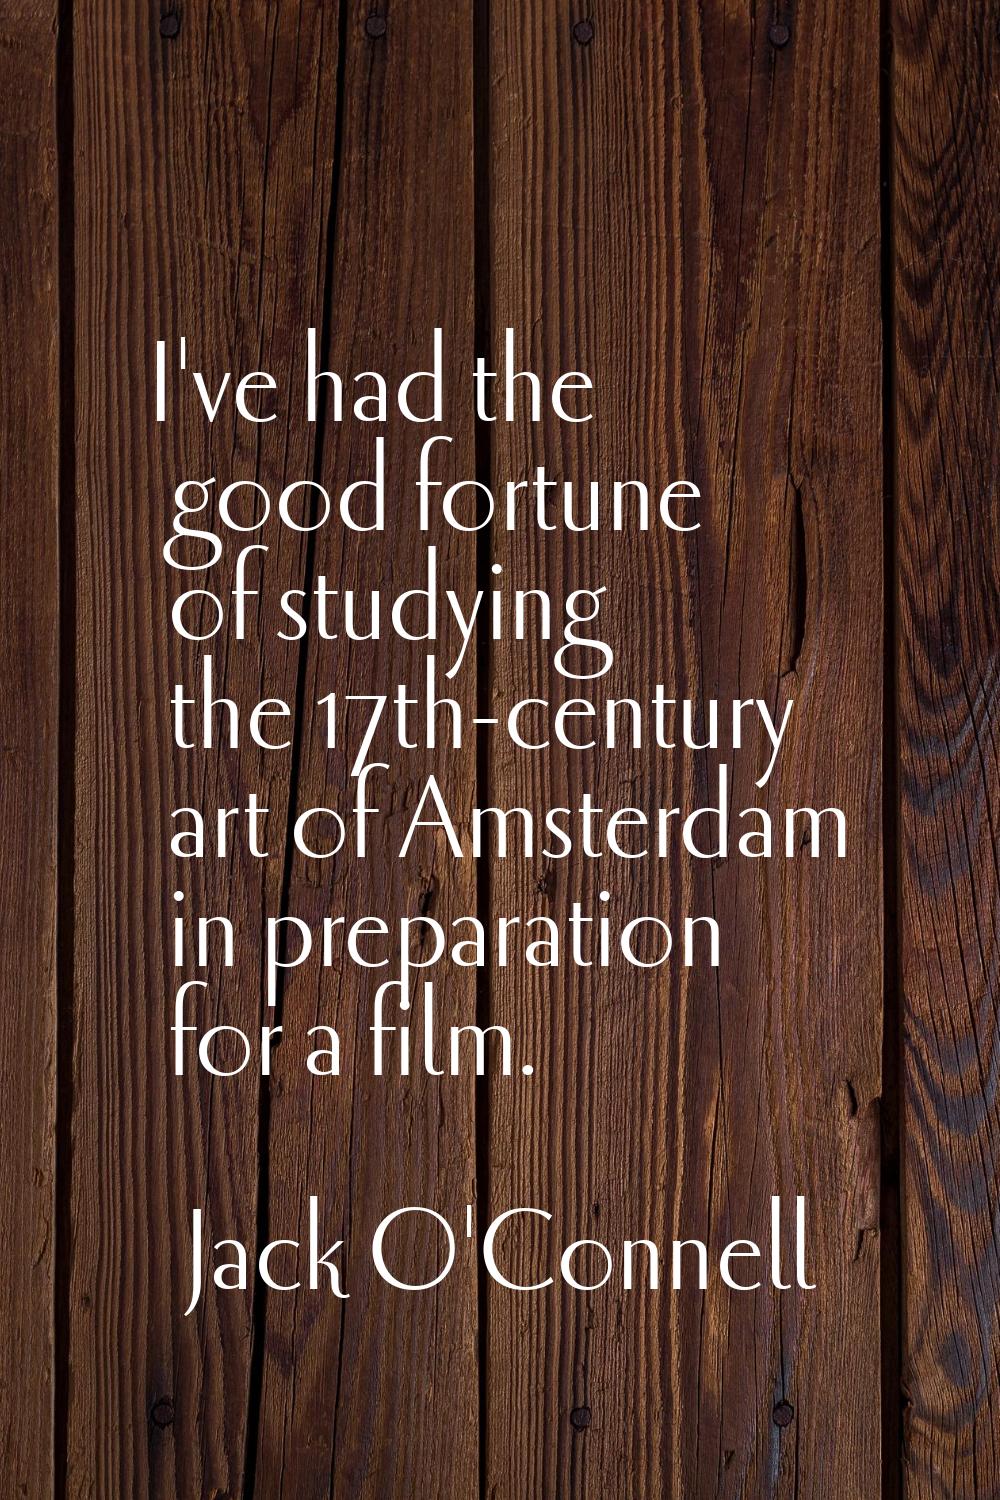 I've had the good fortune of studying the 17th-century art of Amsterdam in preparation for a film.